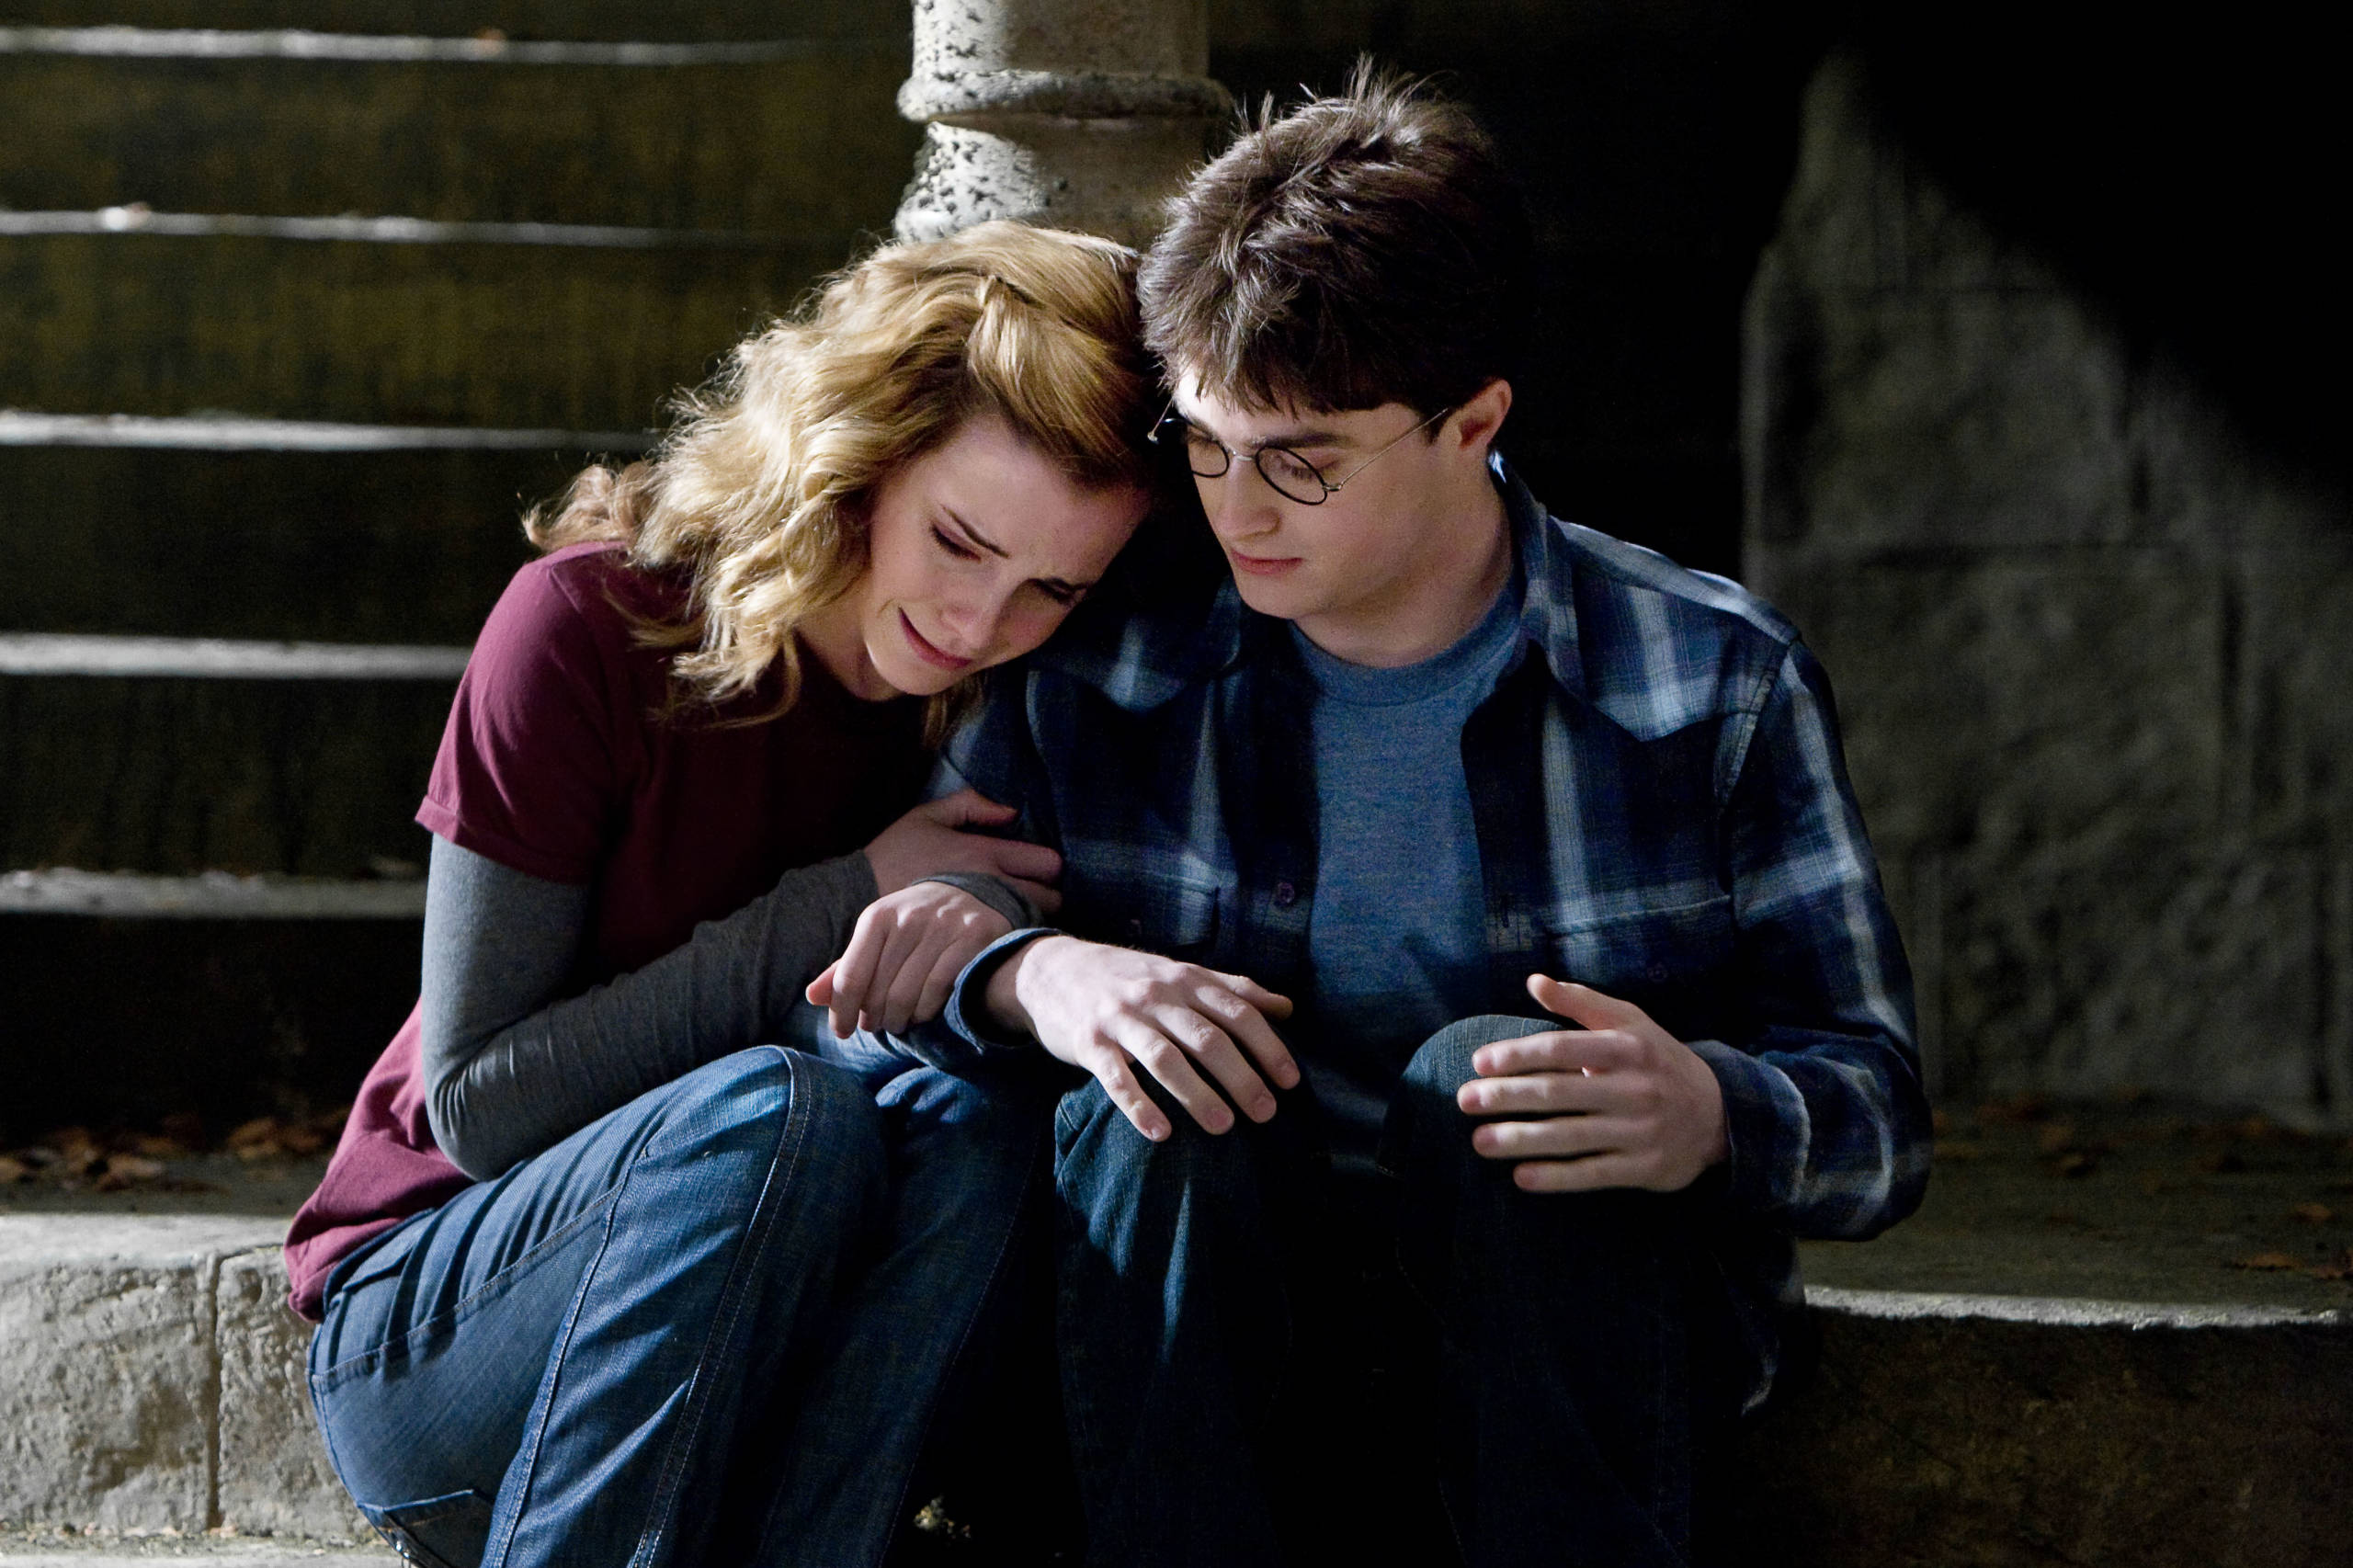 Romantic Tensions The book delves into the complexities of teenage relationships, including Harry's struggles with romantic feelings and Ron's insecurities about Hermione.]]>